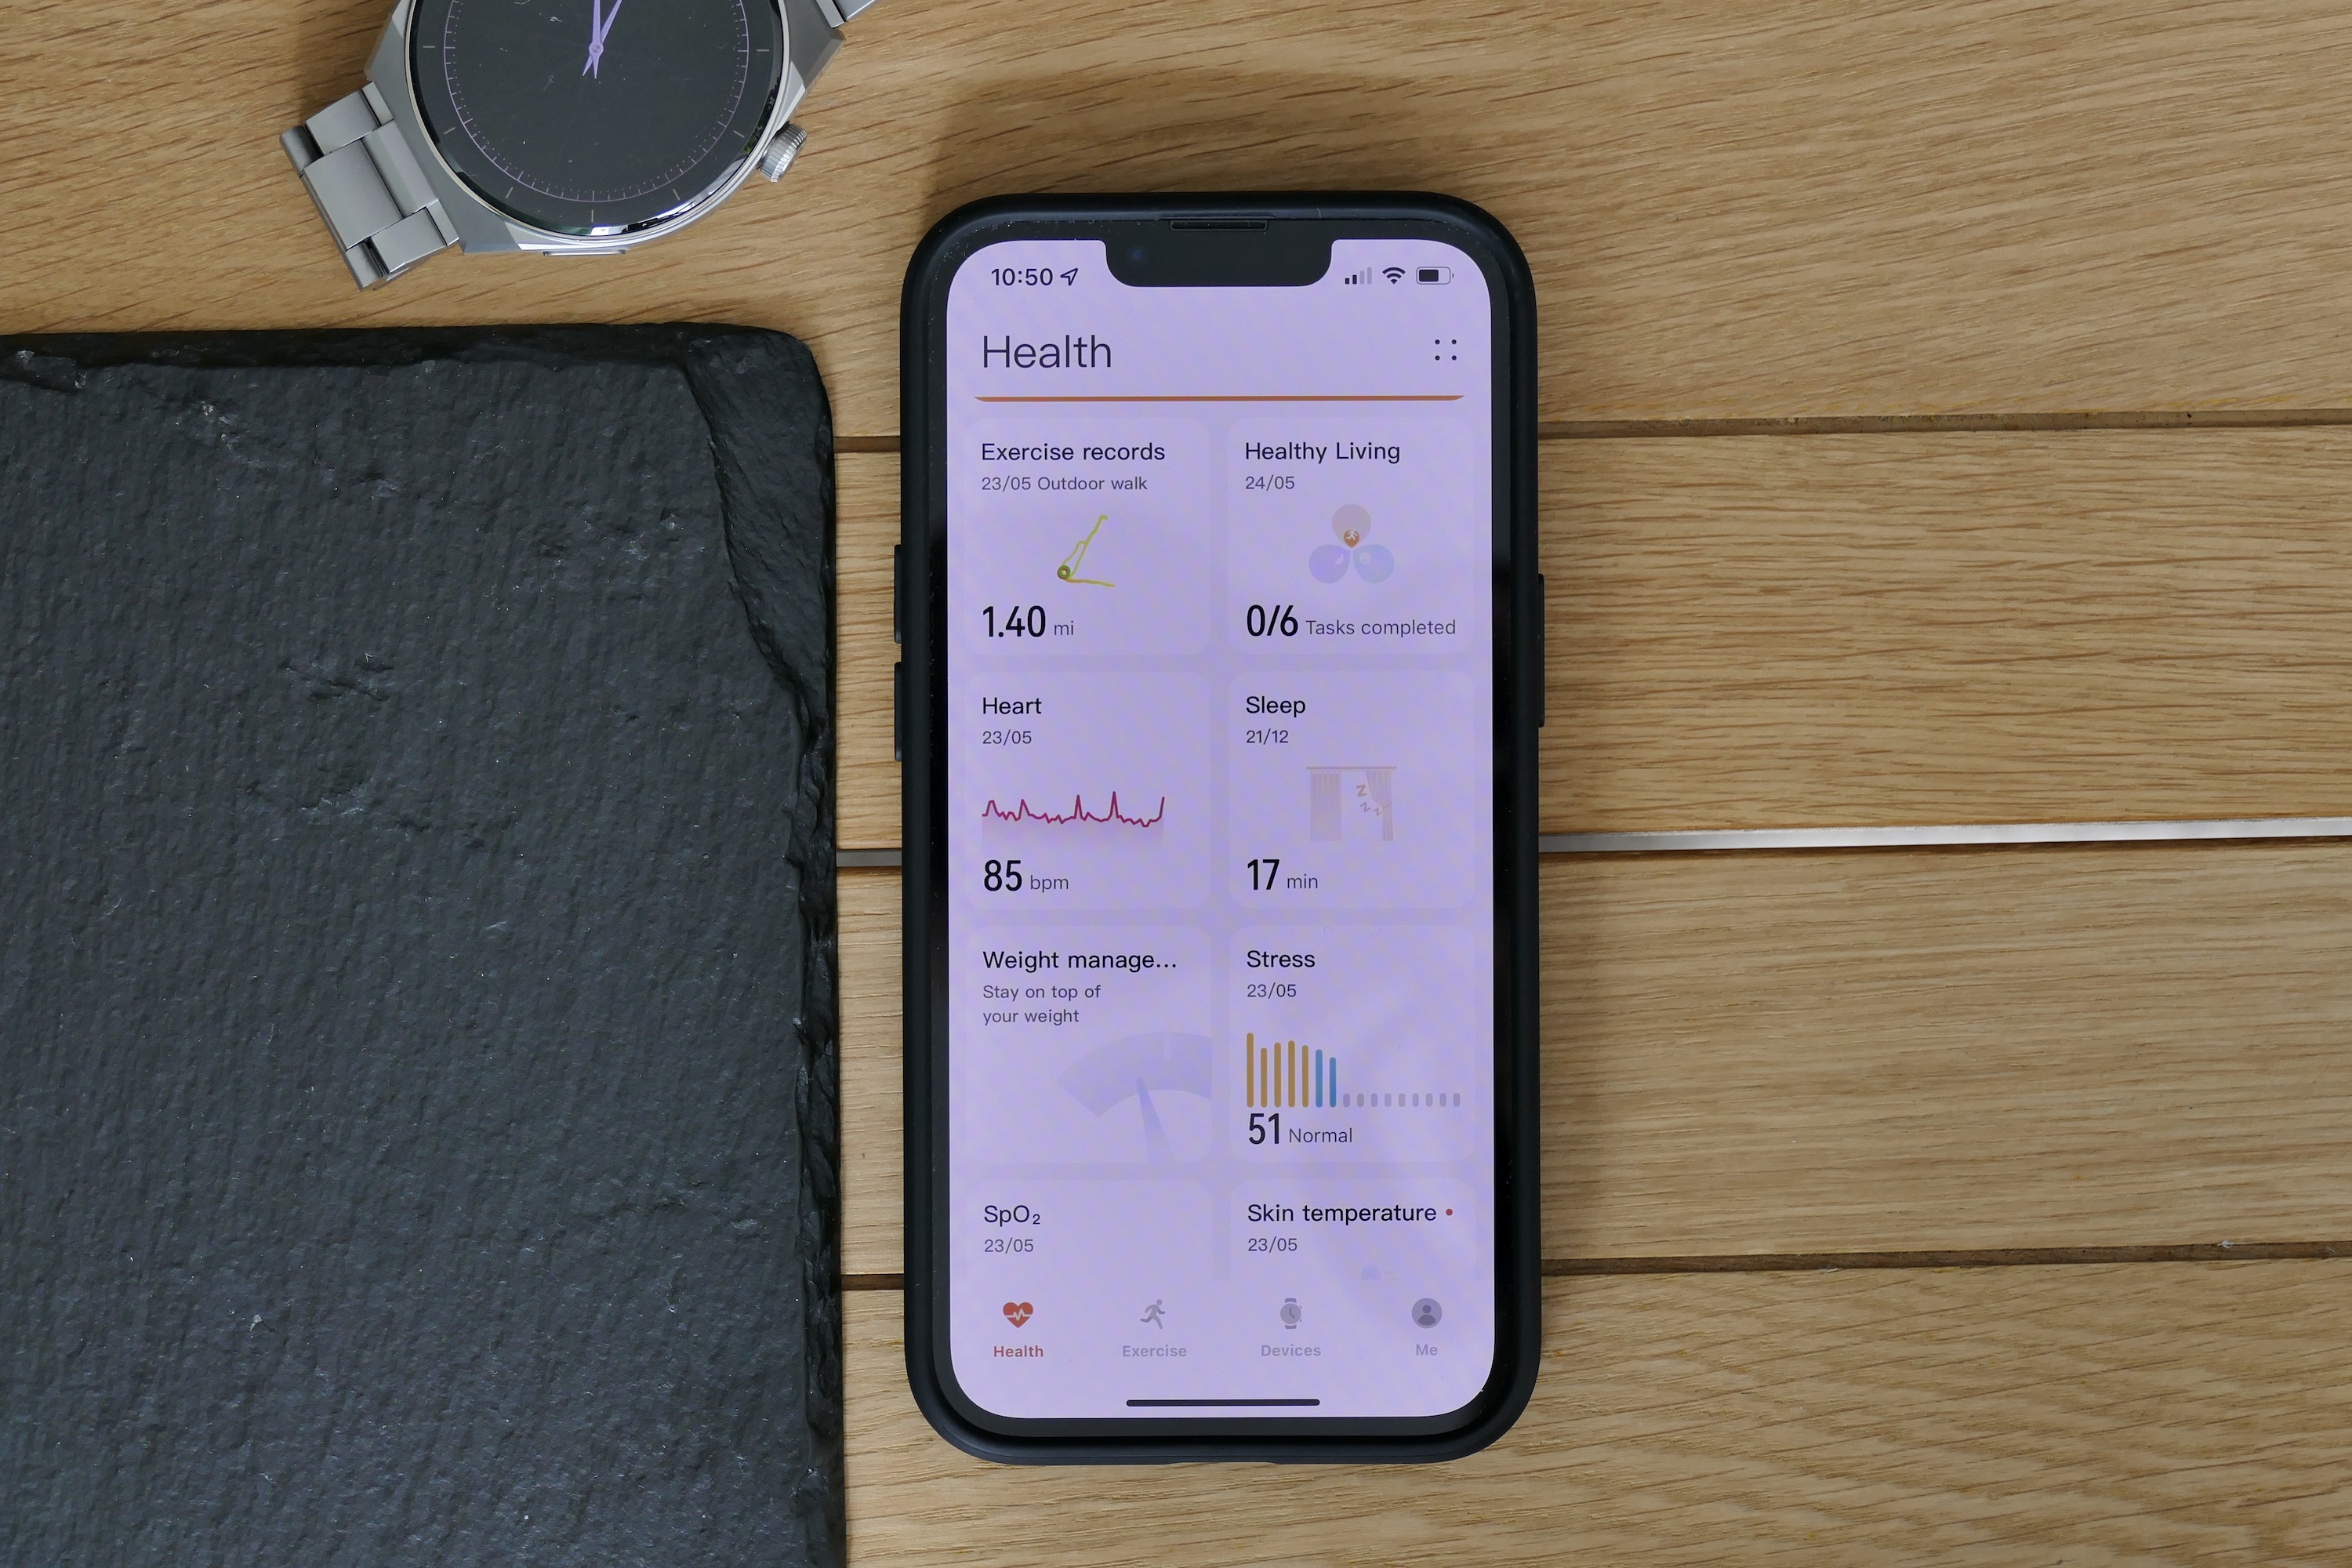 Huawei Health app showing the main activity data overview page.